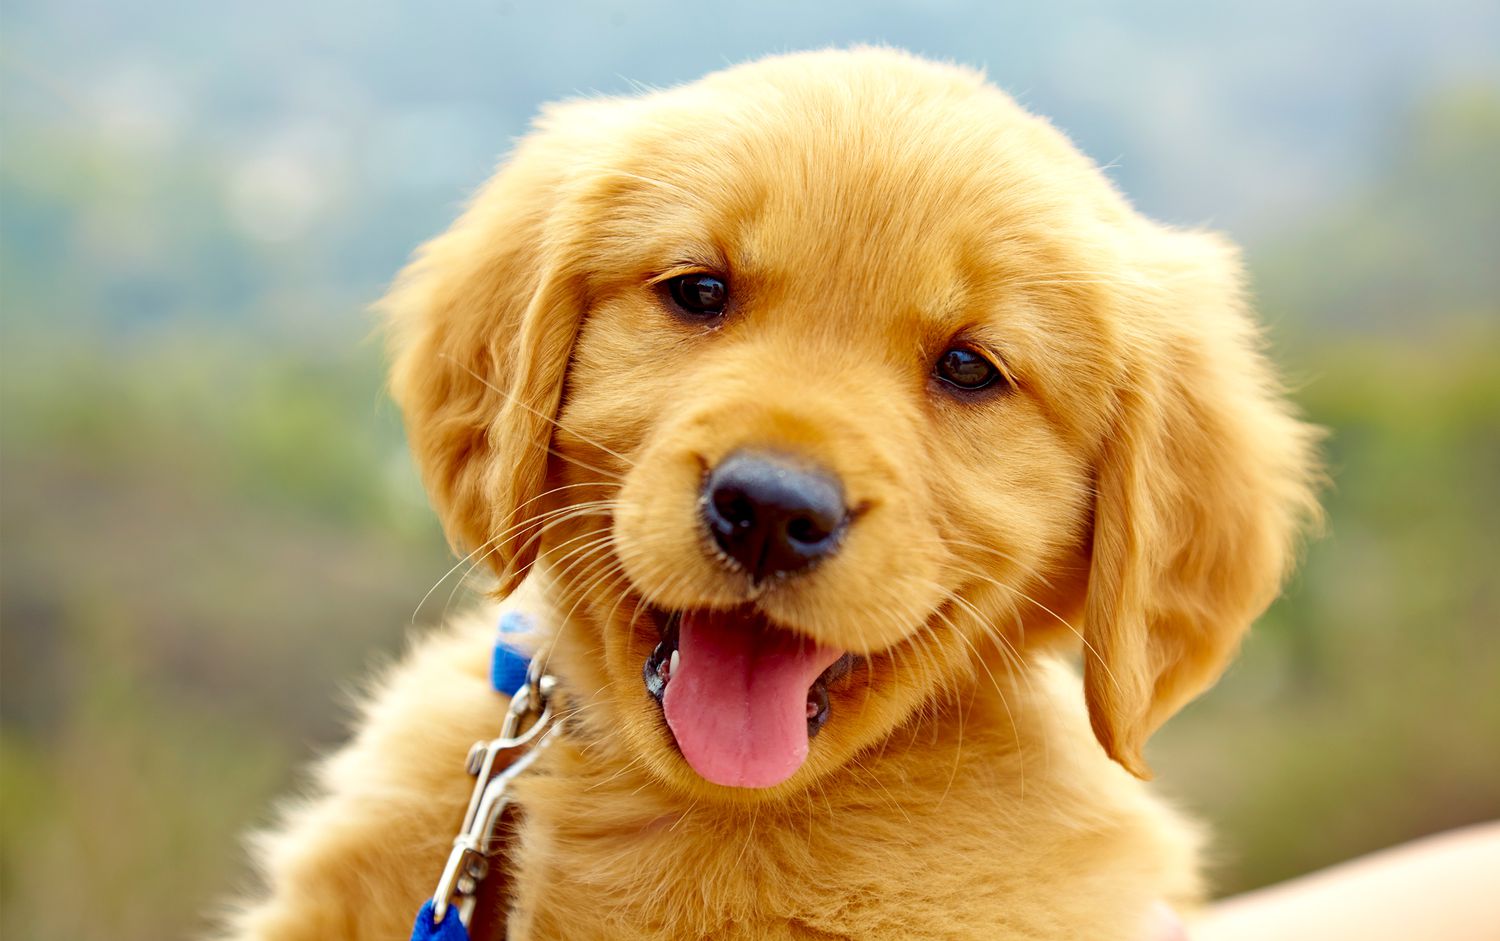 50 Cute Dog Names to Call Your Adorable Pup | Better Homes & Gardens